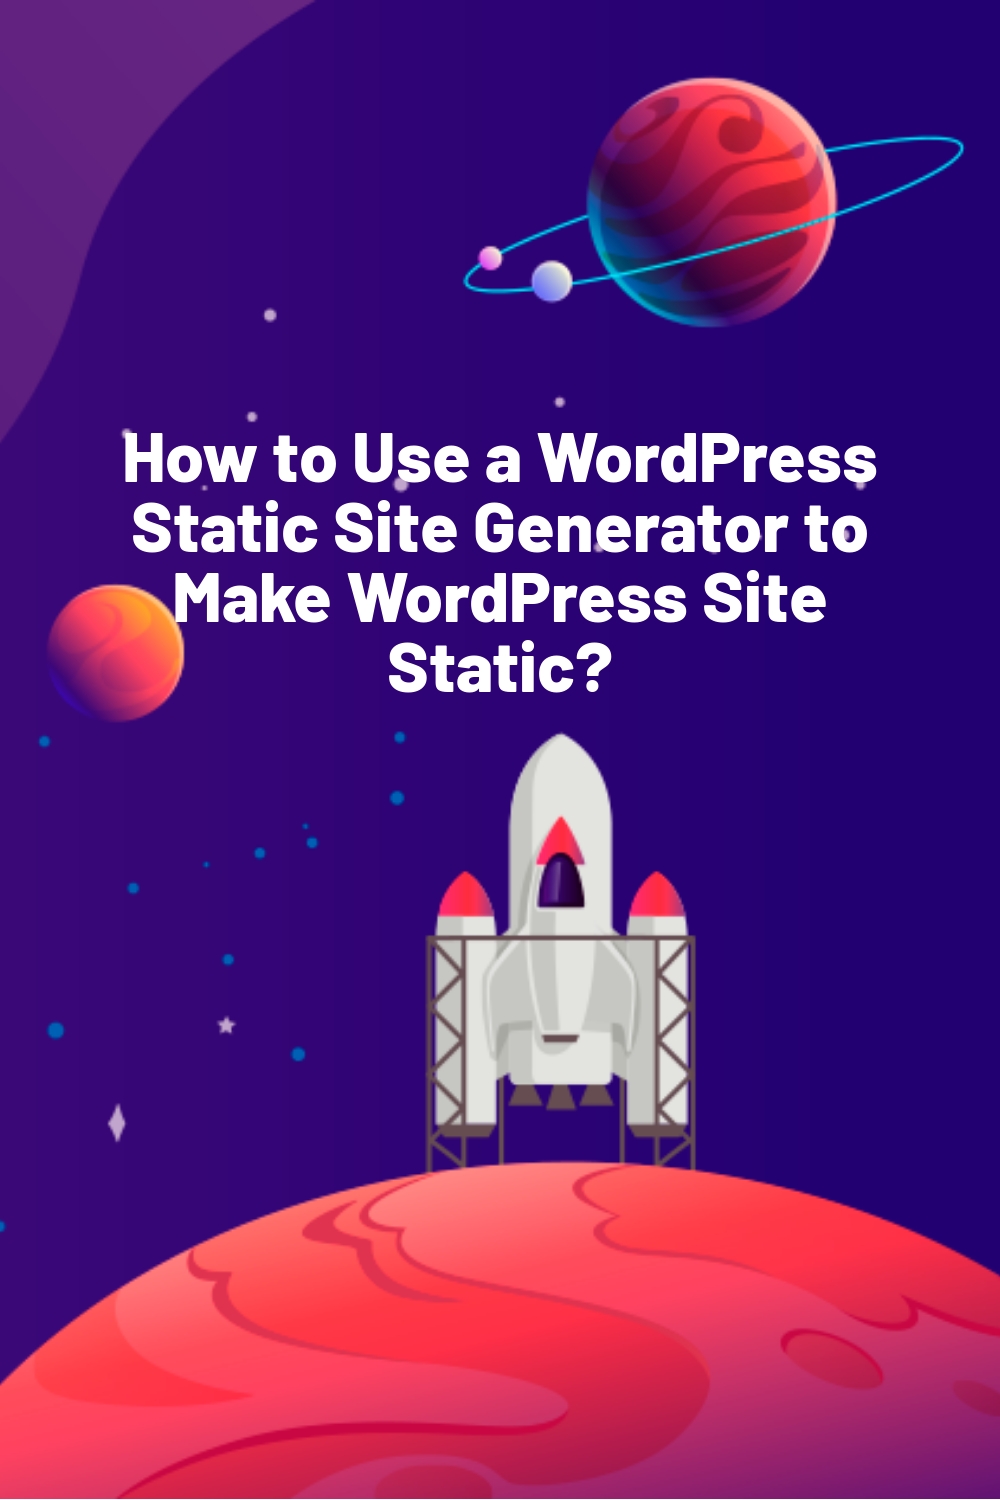 How to Use a WordPress Static Site Generator to Make WordPress Site Static?